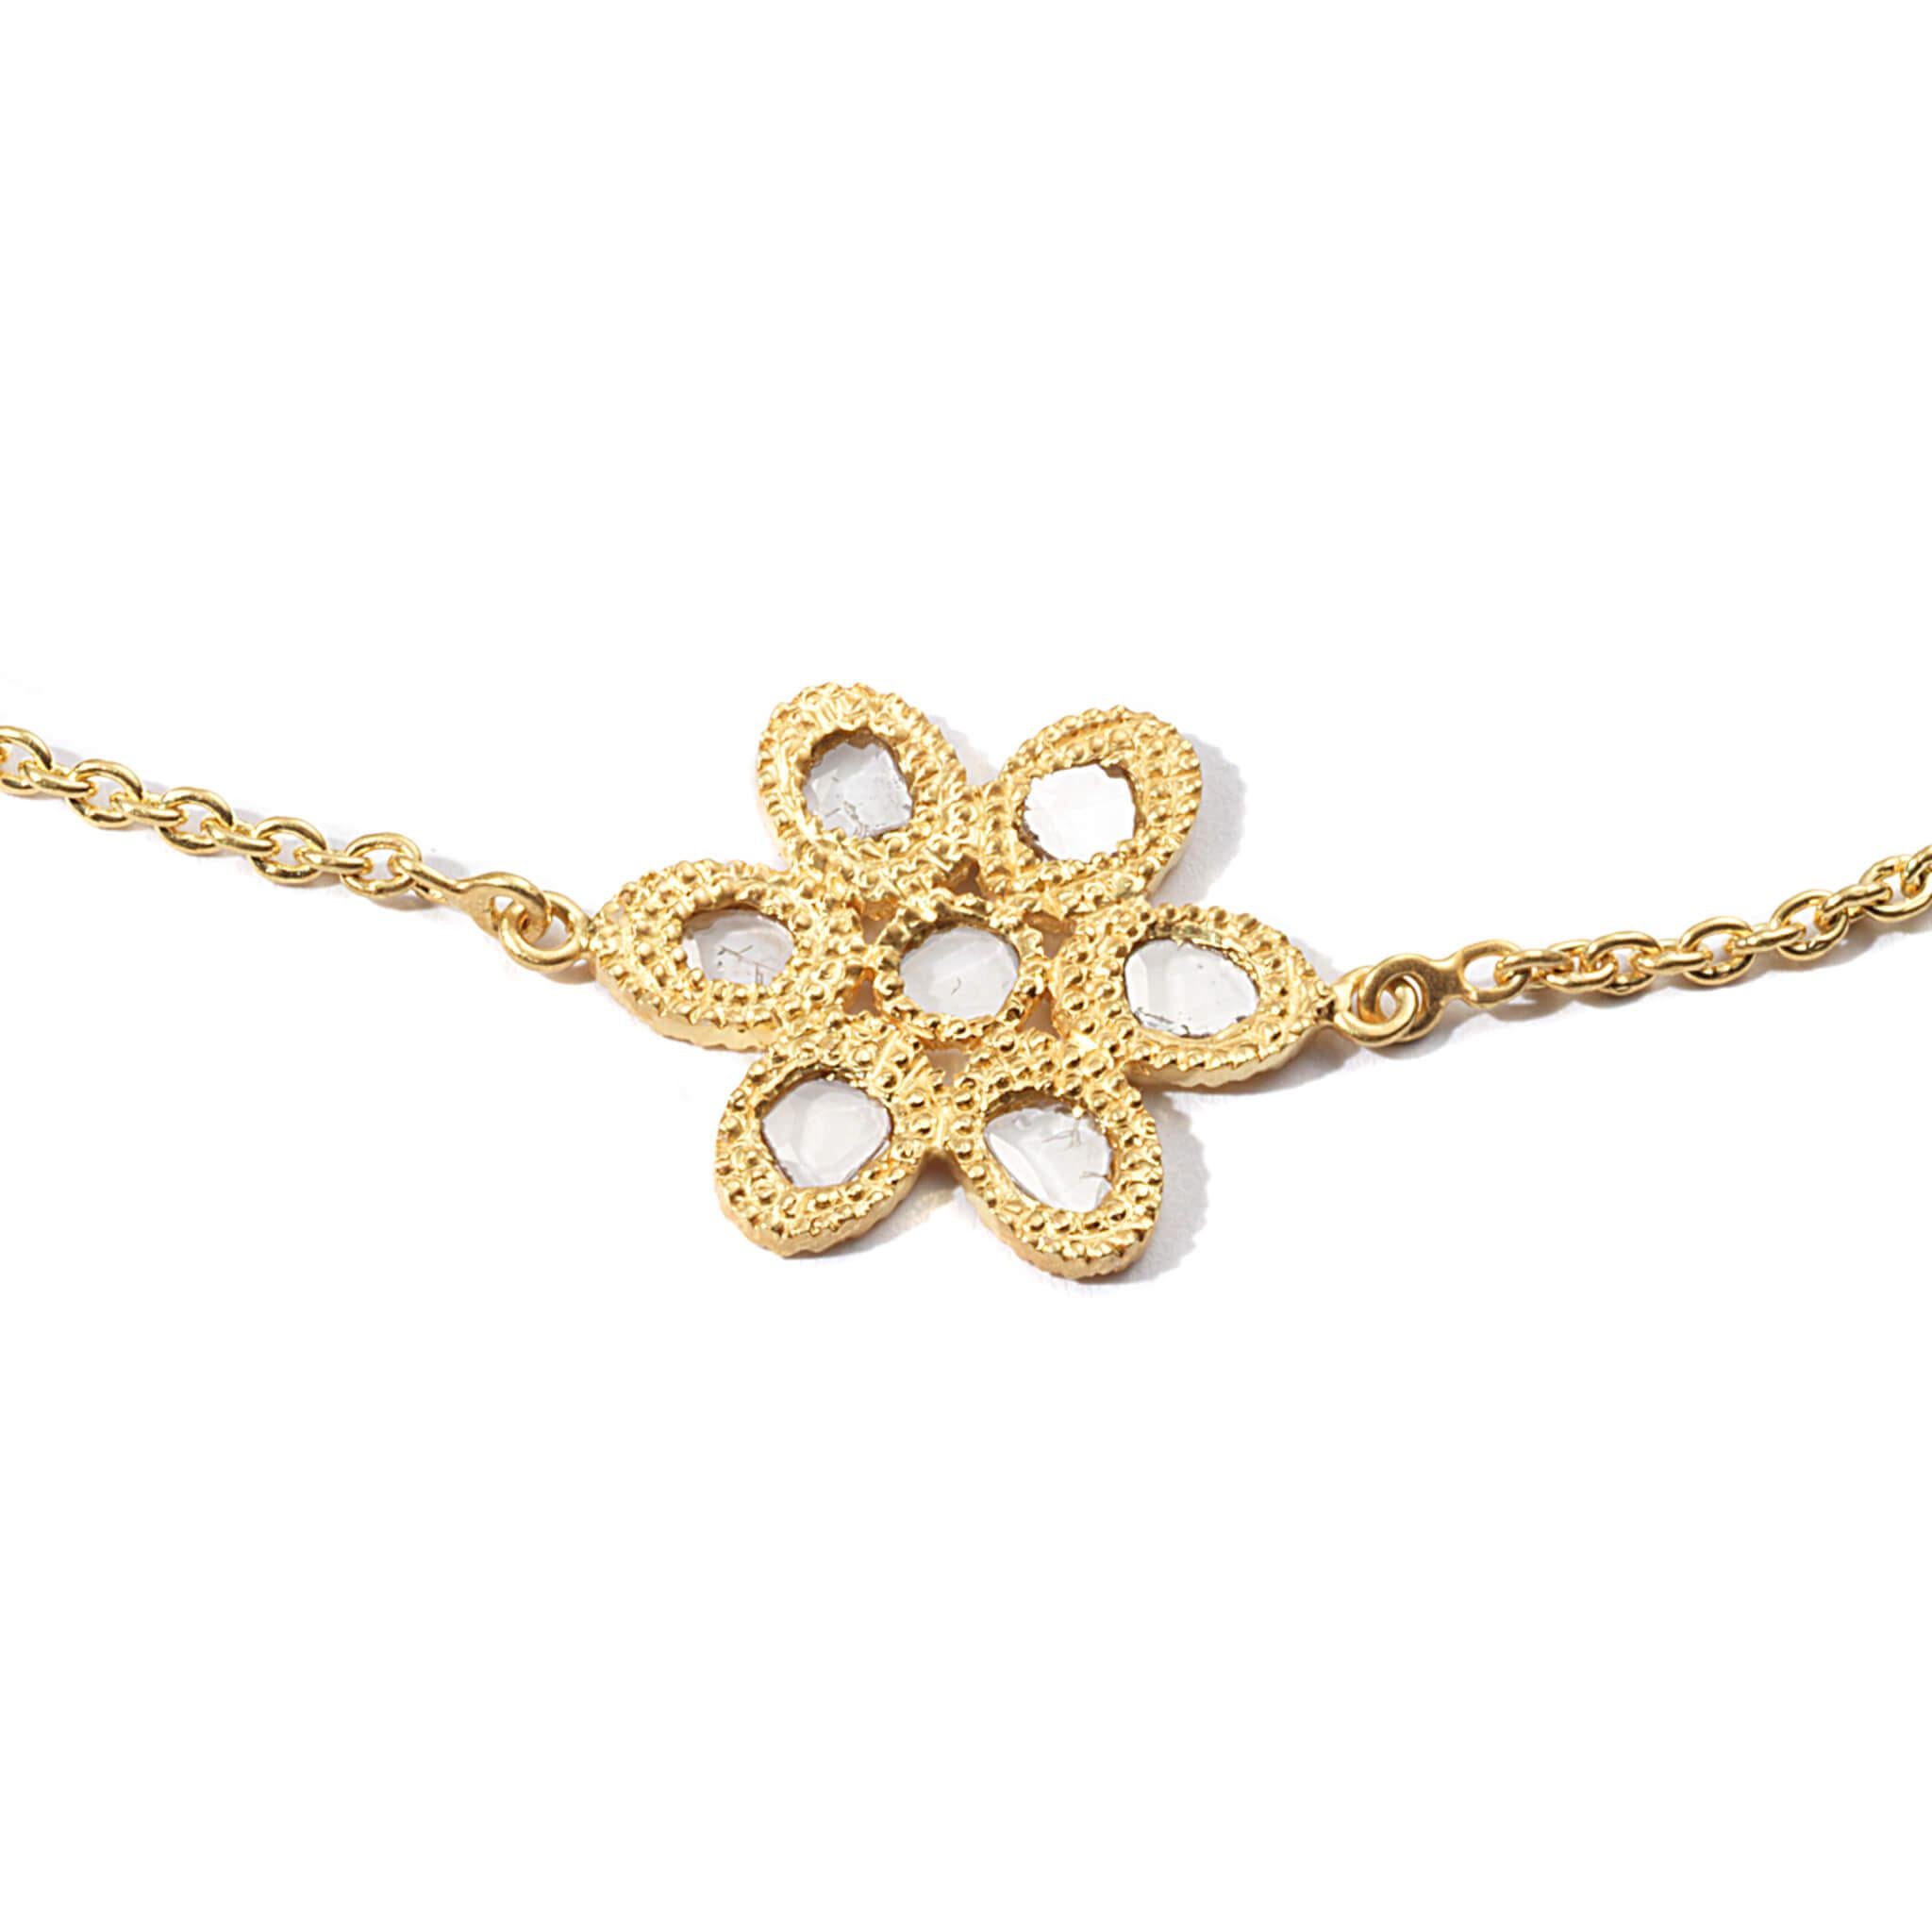 Affinity flower bracelet set in 20K yellow gold with 0.68cts diamond.
